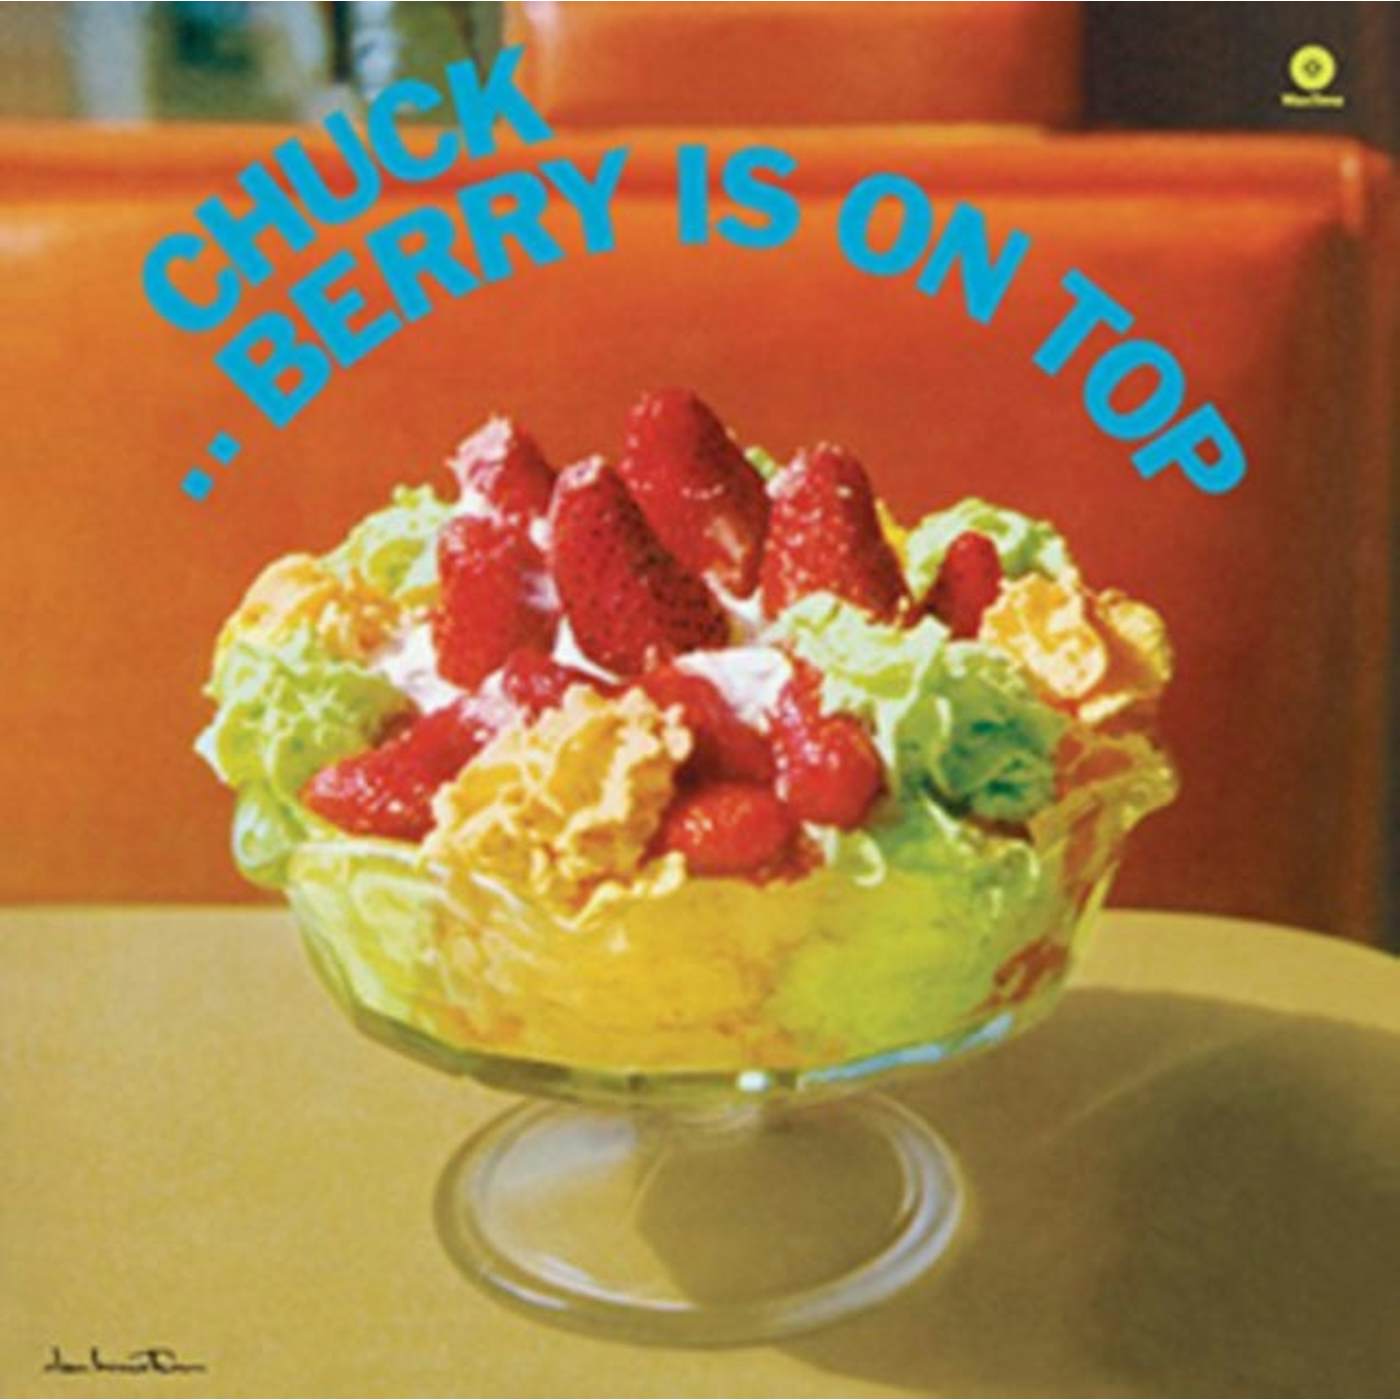 Chuck Berry LP Vinyl Record - Berry Is On Top